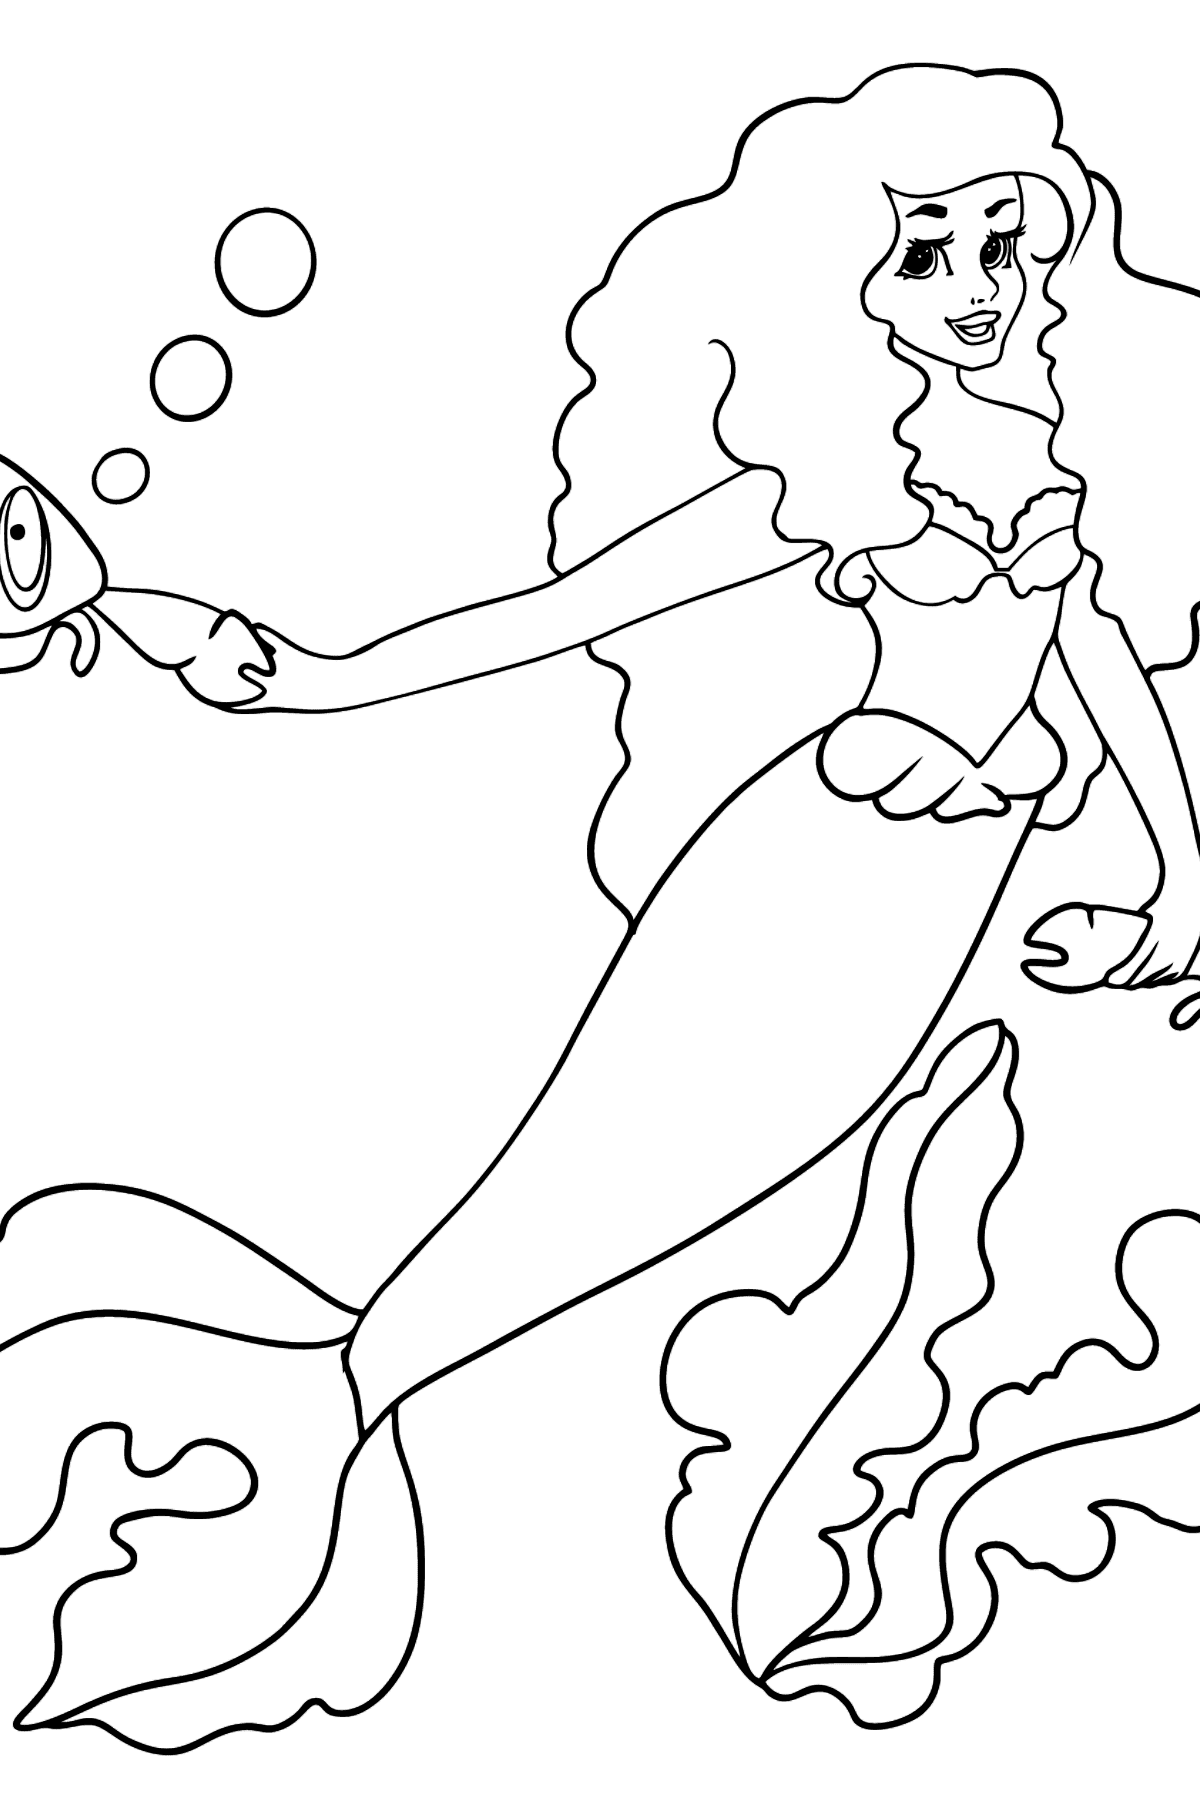 Coloring Page Mermaid and two crabs - Coloring Pages for Kids